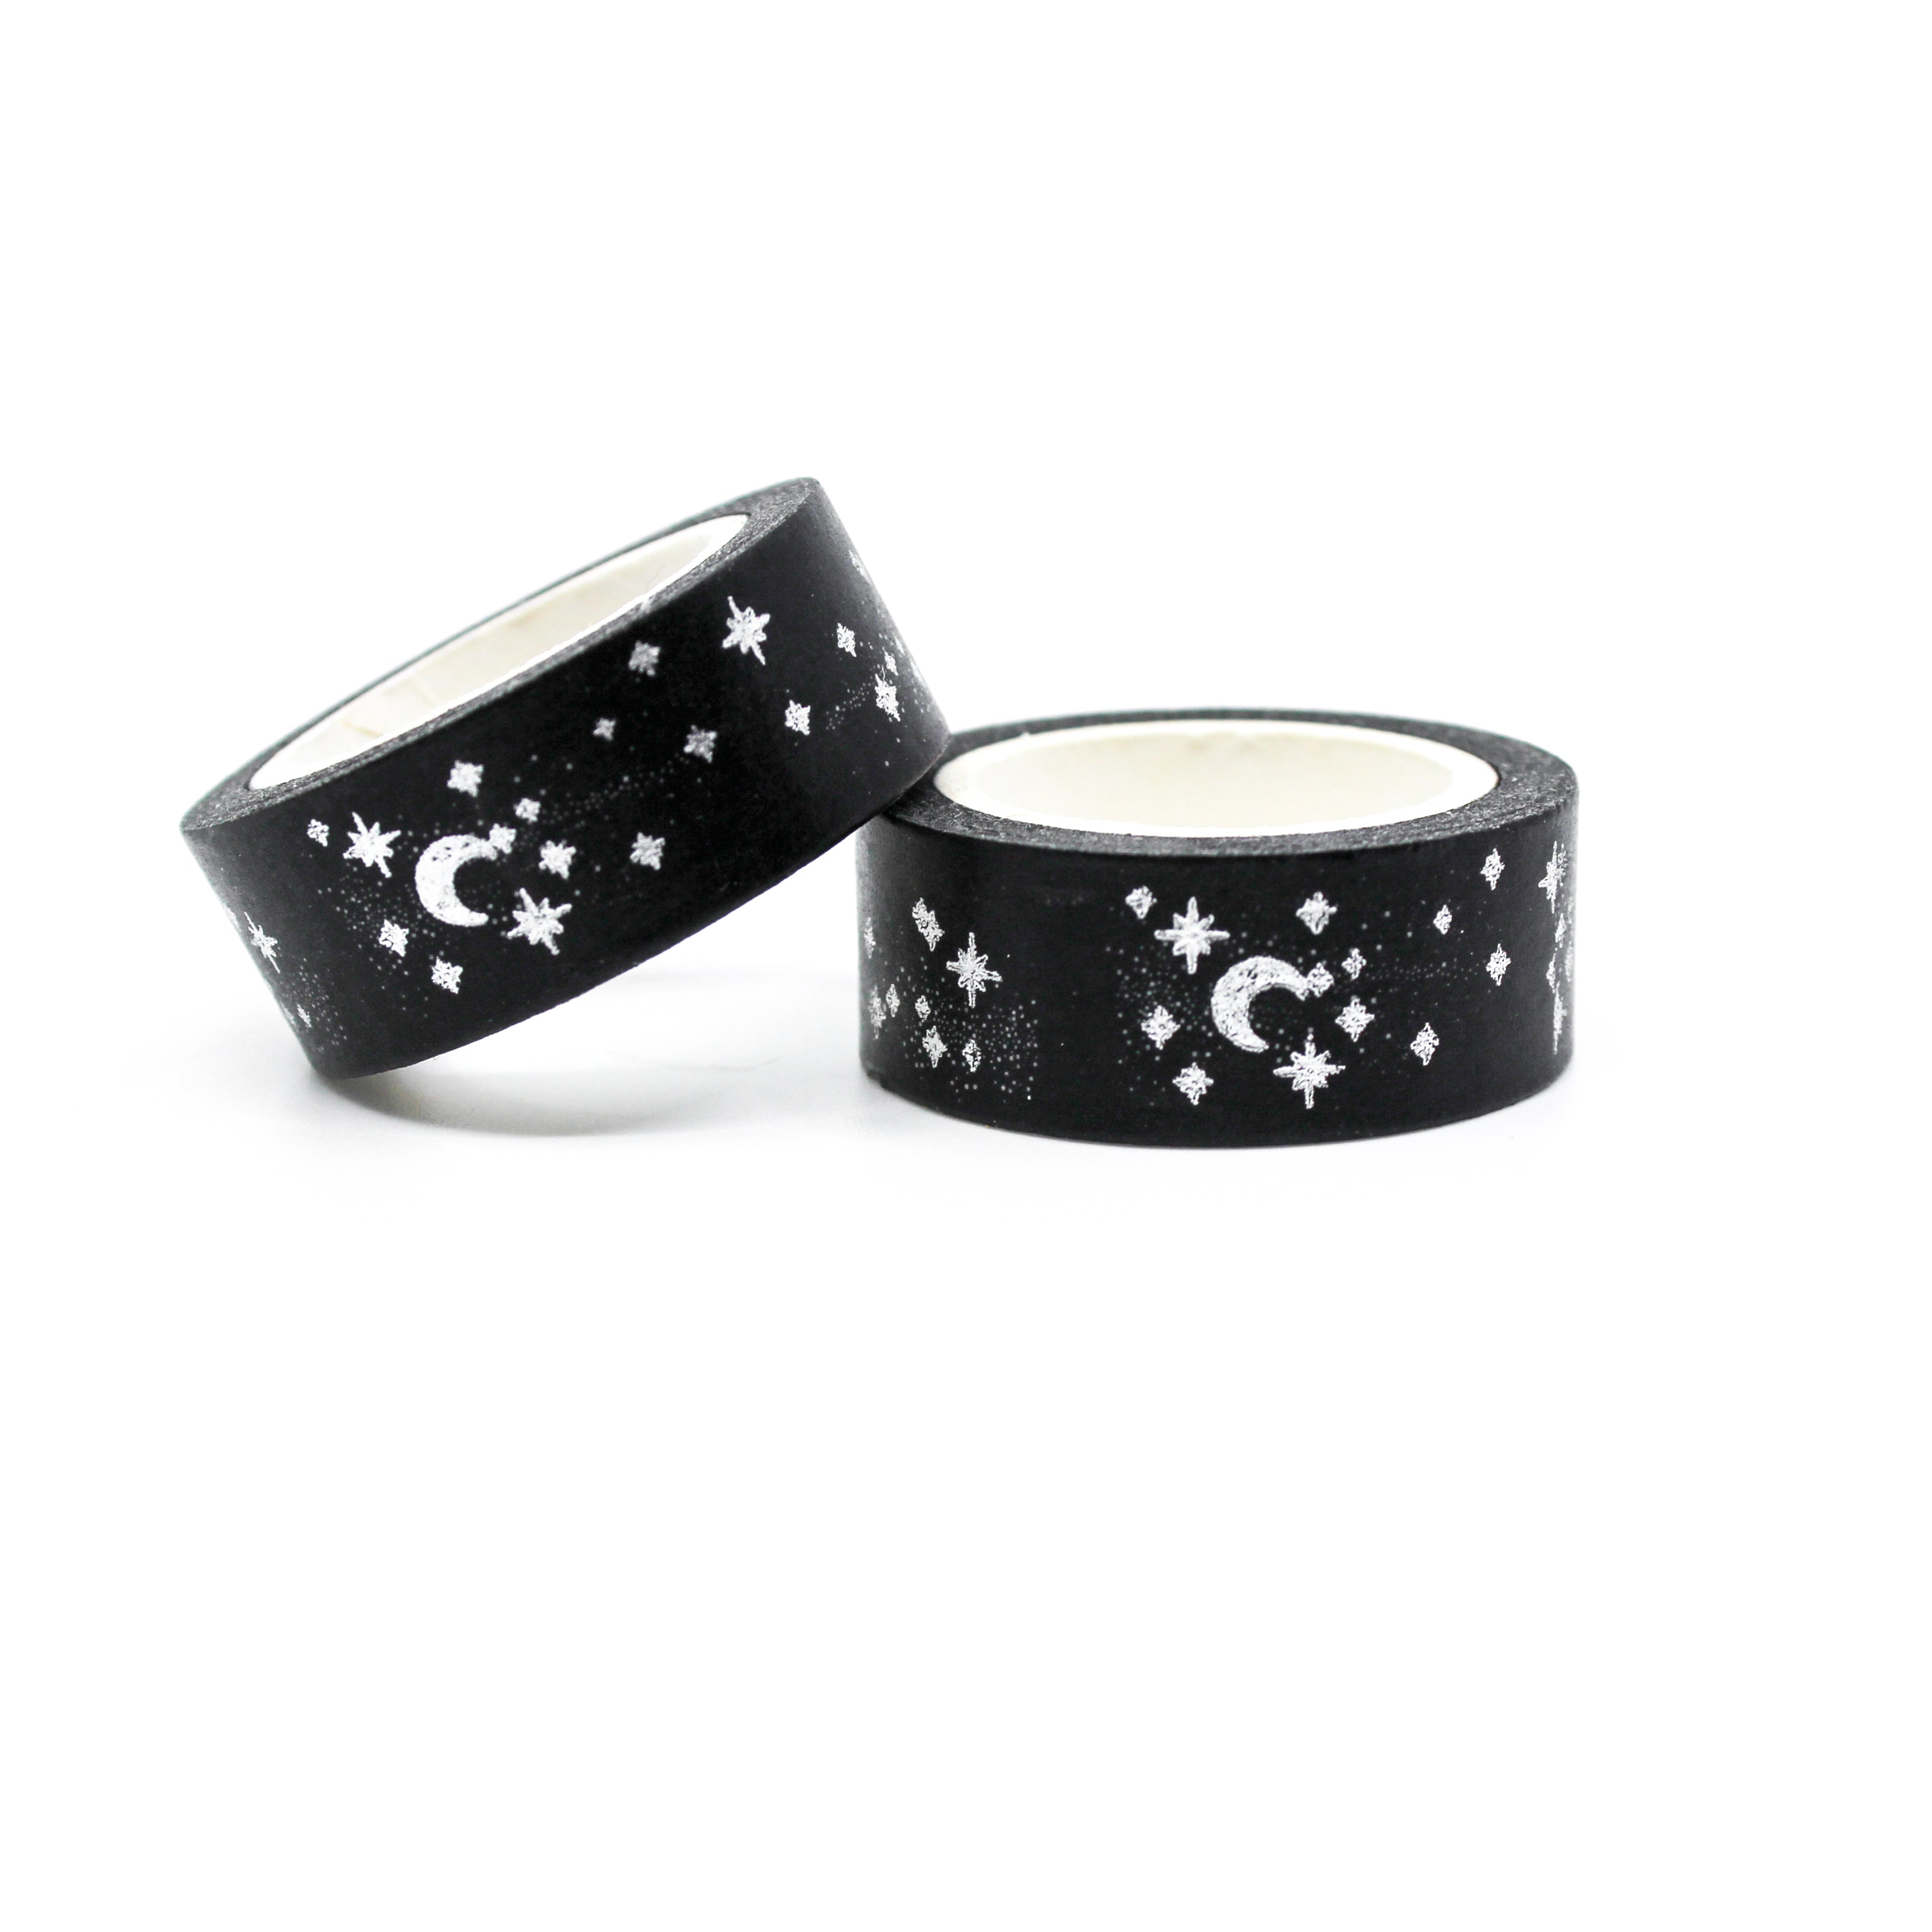 This is a cute celestial stars surrounding the moon washi tapes from BBB Supplies Craft Shop